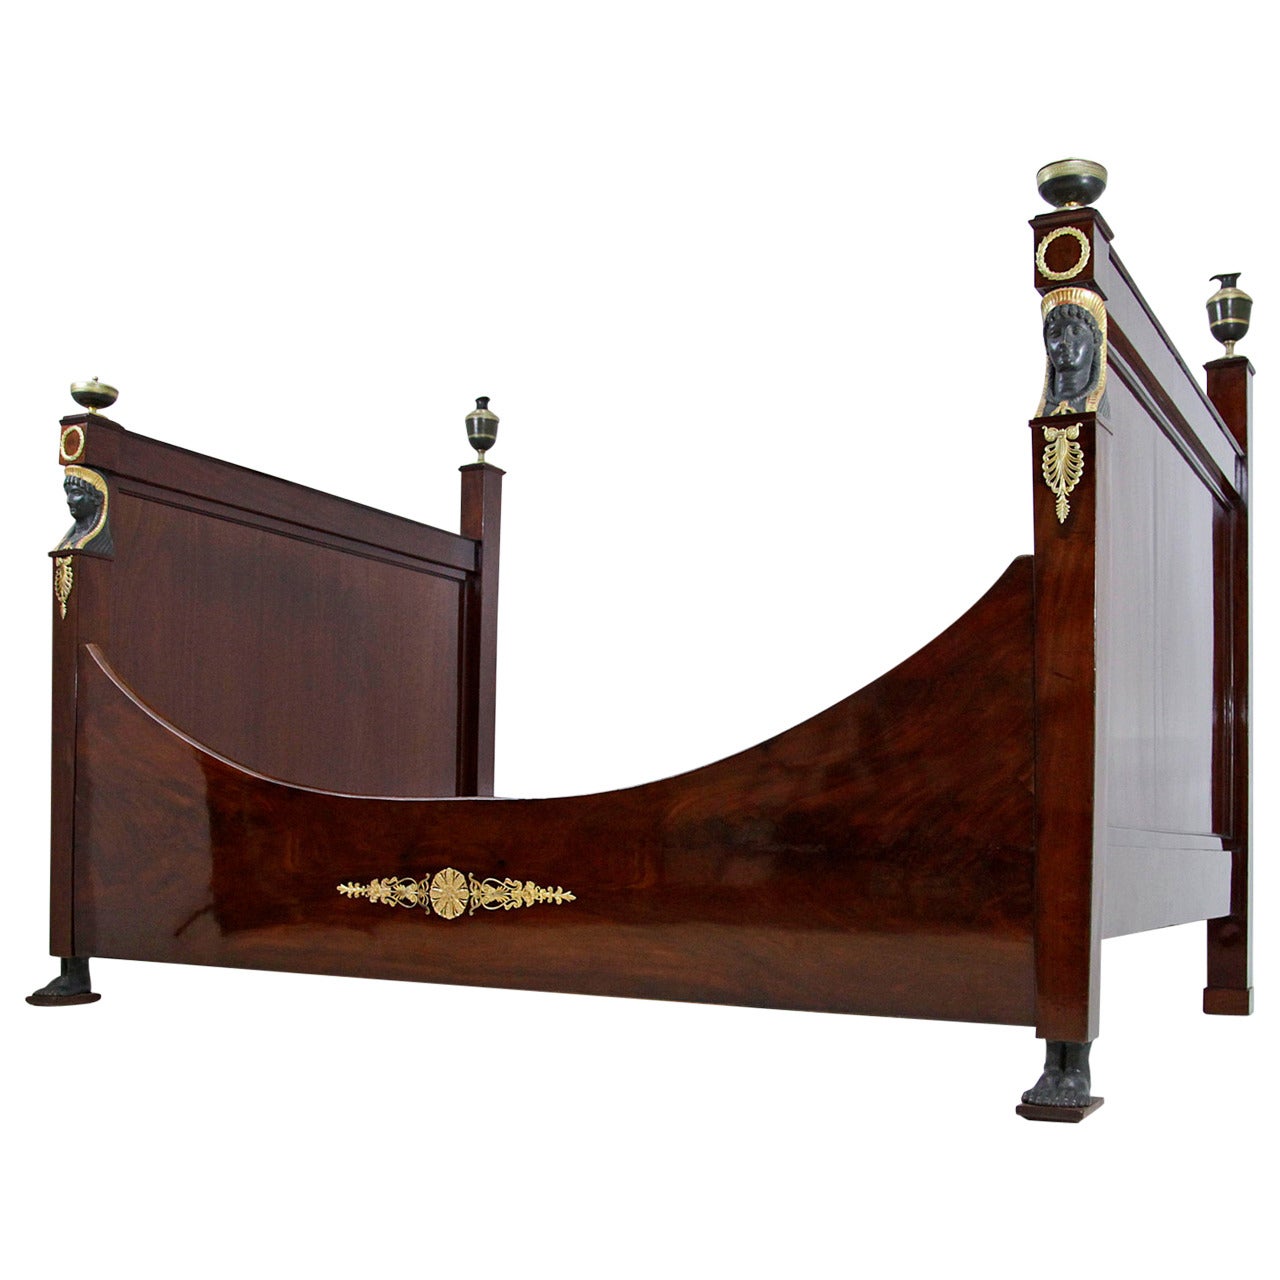 Exceptional French Empire Bed with Rich Bronze Ornaments, circa 1810